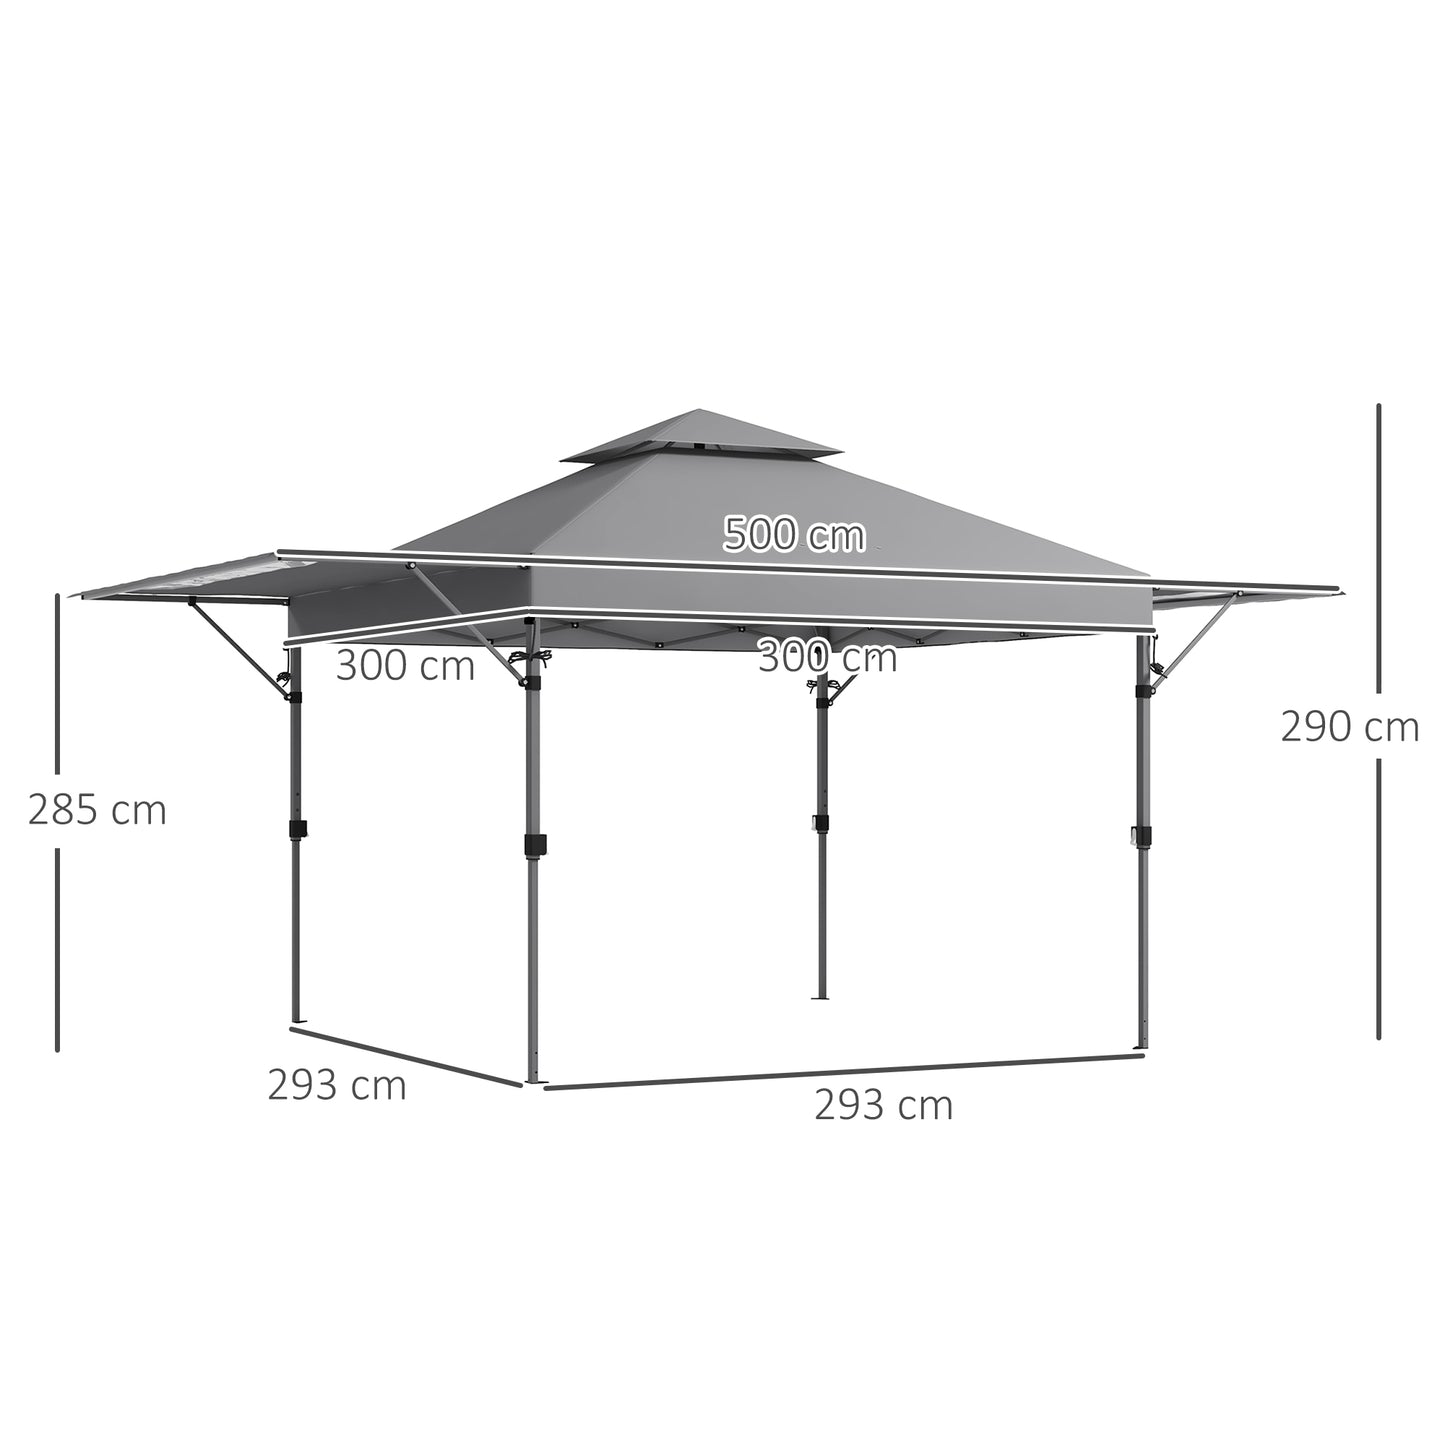 Outsunny 5 x 3(m) Pop Up Gazebo with Extend Dual Awnings, 1 Person Easy up Marquee Party Tent w-1-Button Push, Double Roof, Sandbags,